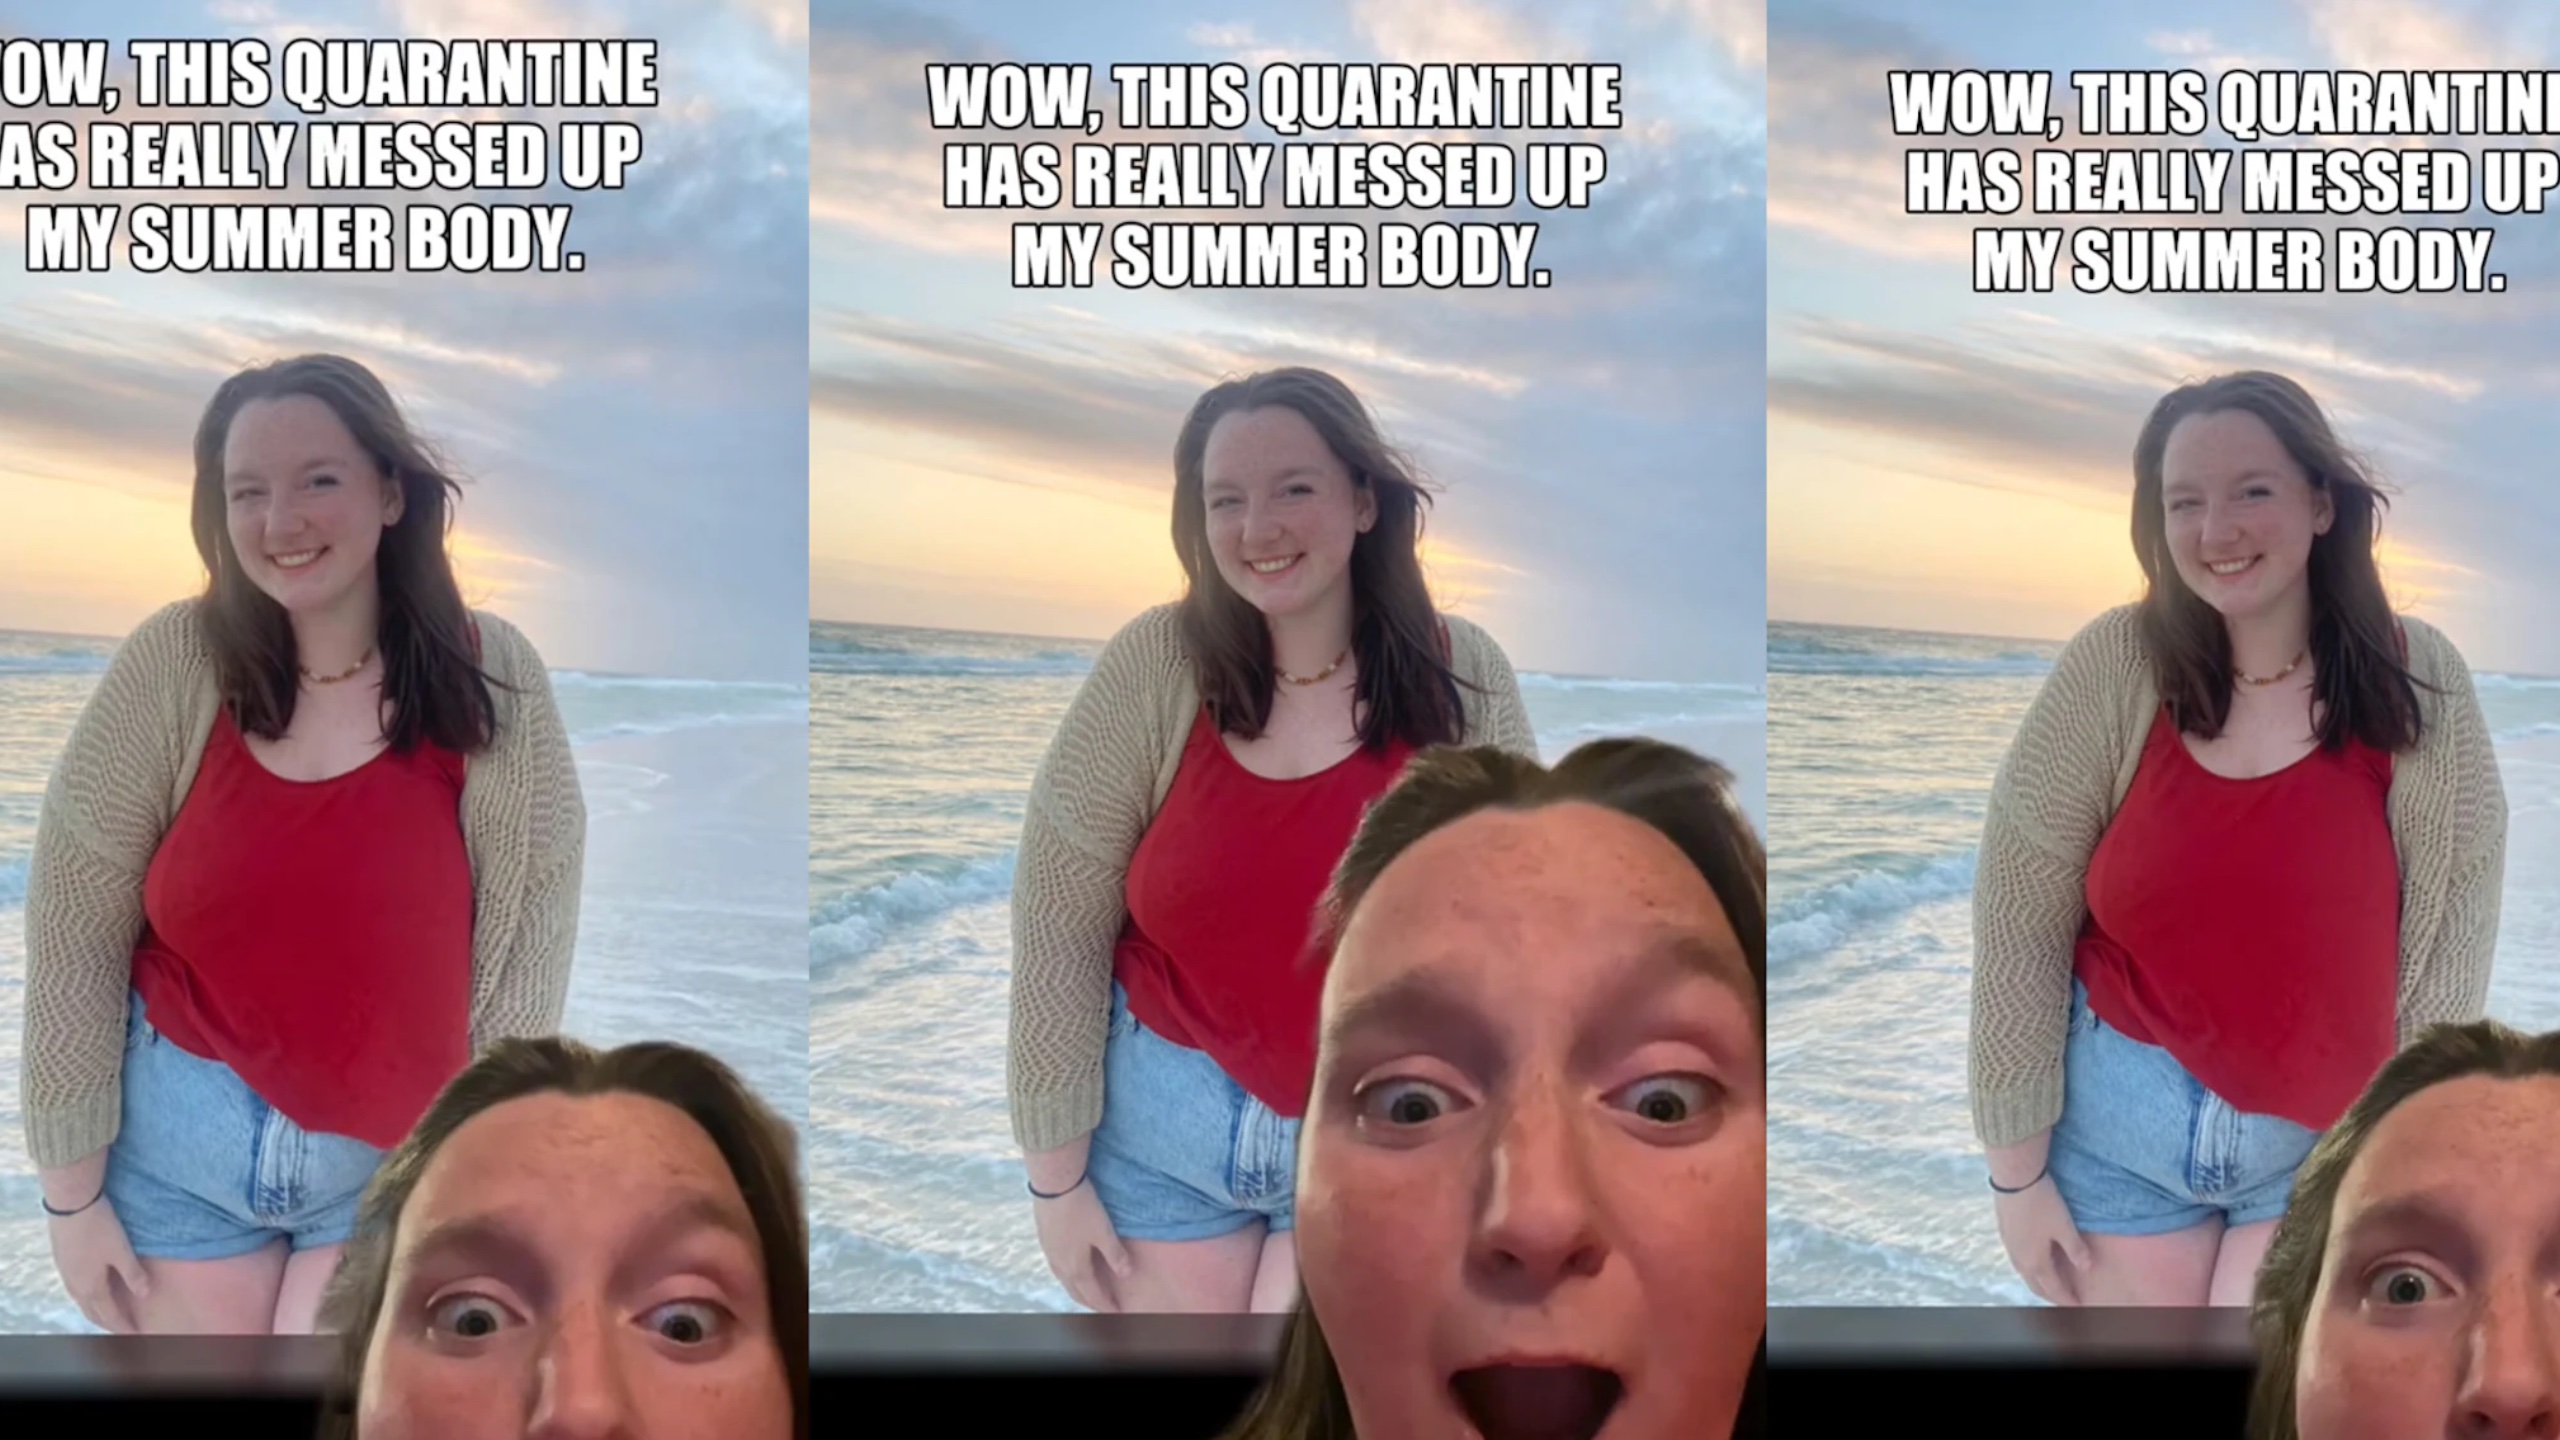 Body-shaming AI Meme Maker on TikTok is a prime example of unaligned AI